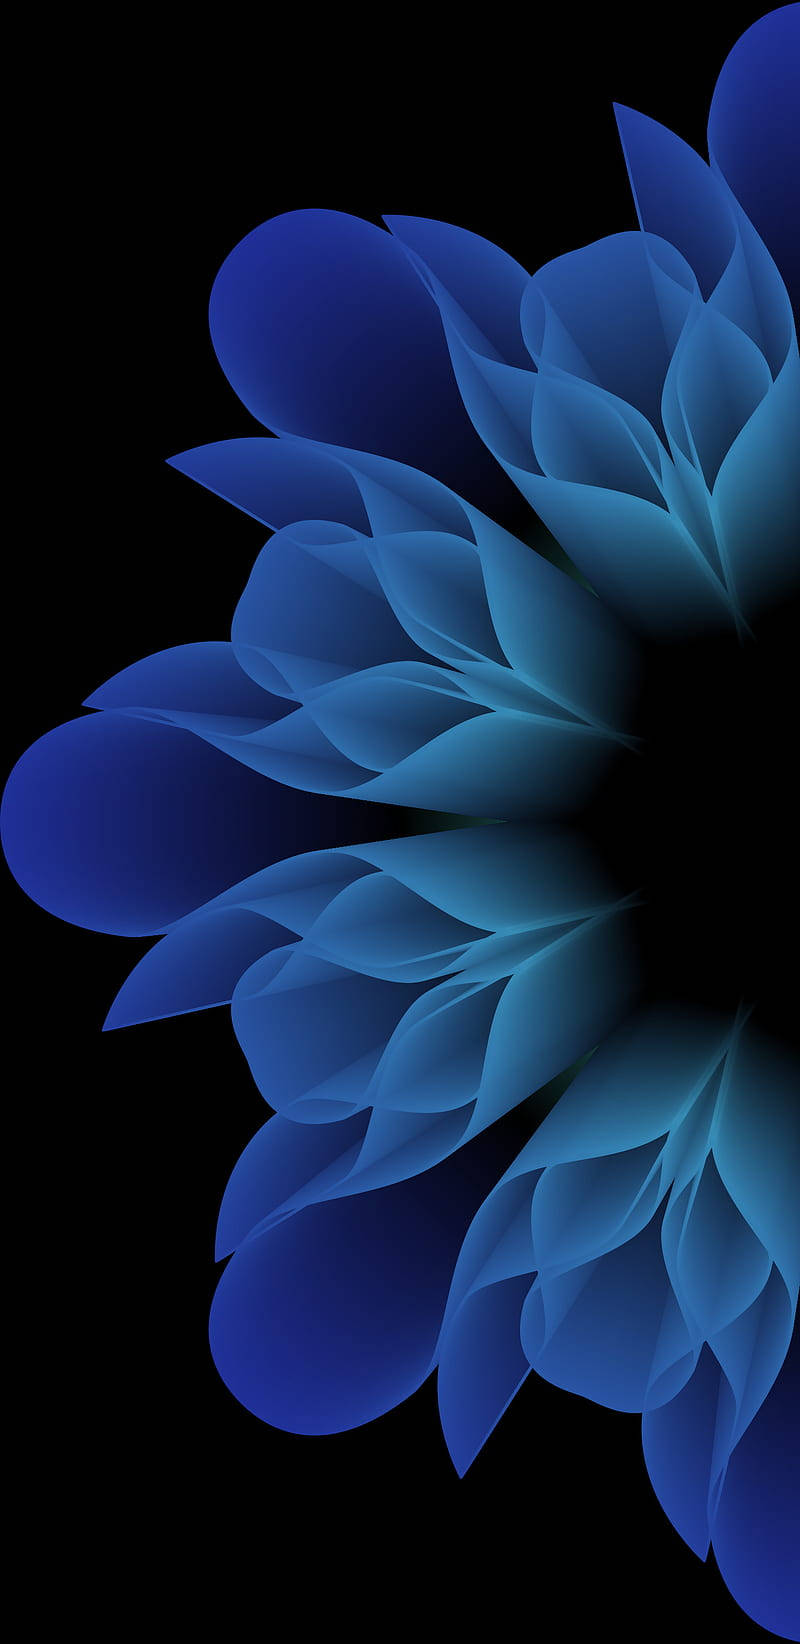 Blue Roses On Samsung Galaxy Note 7 Picture